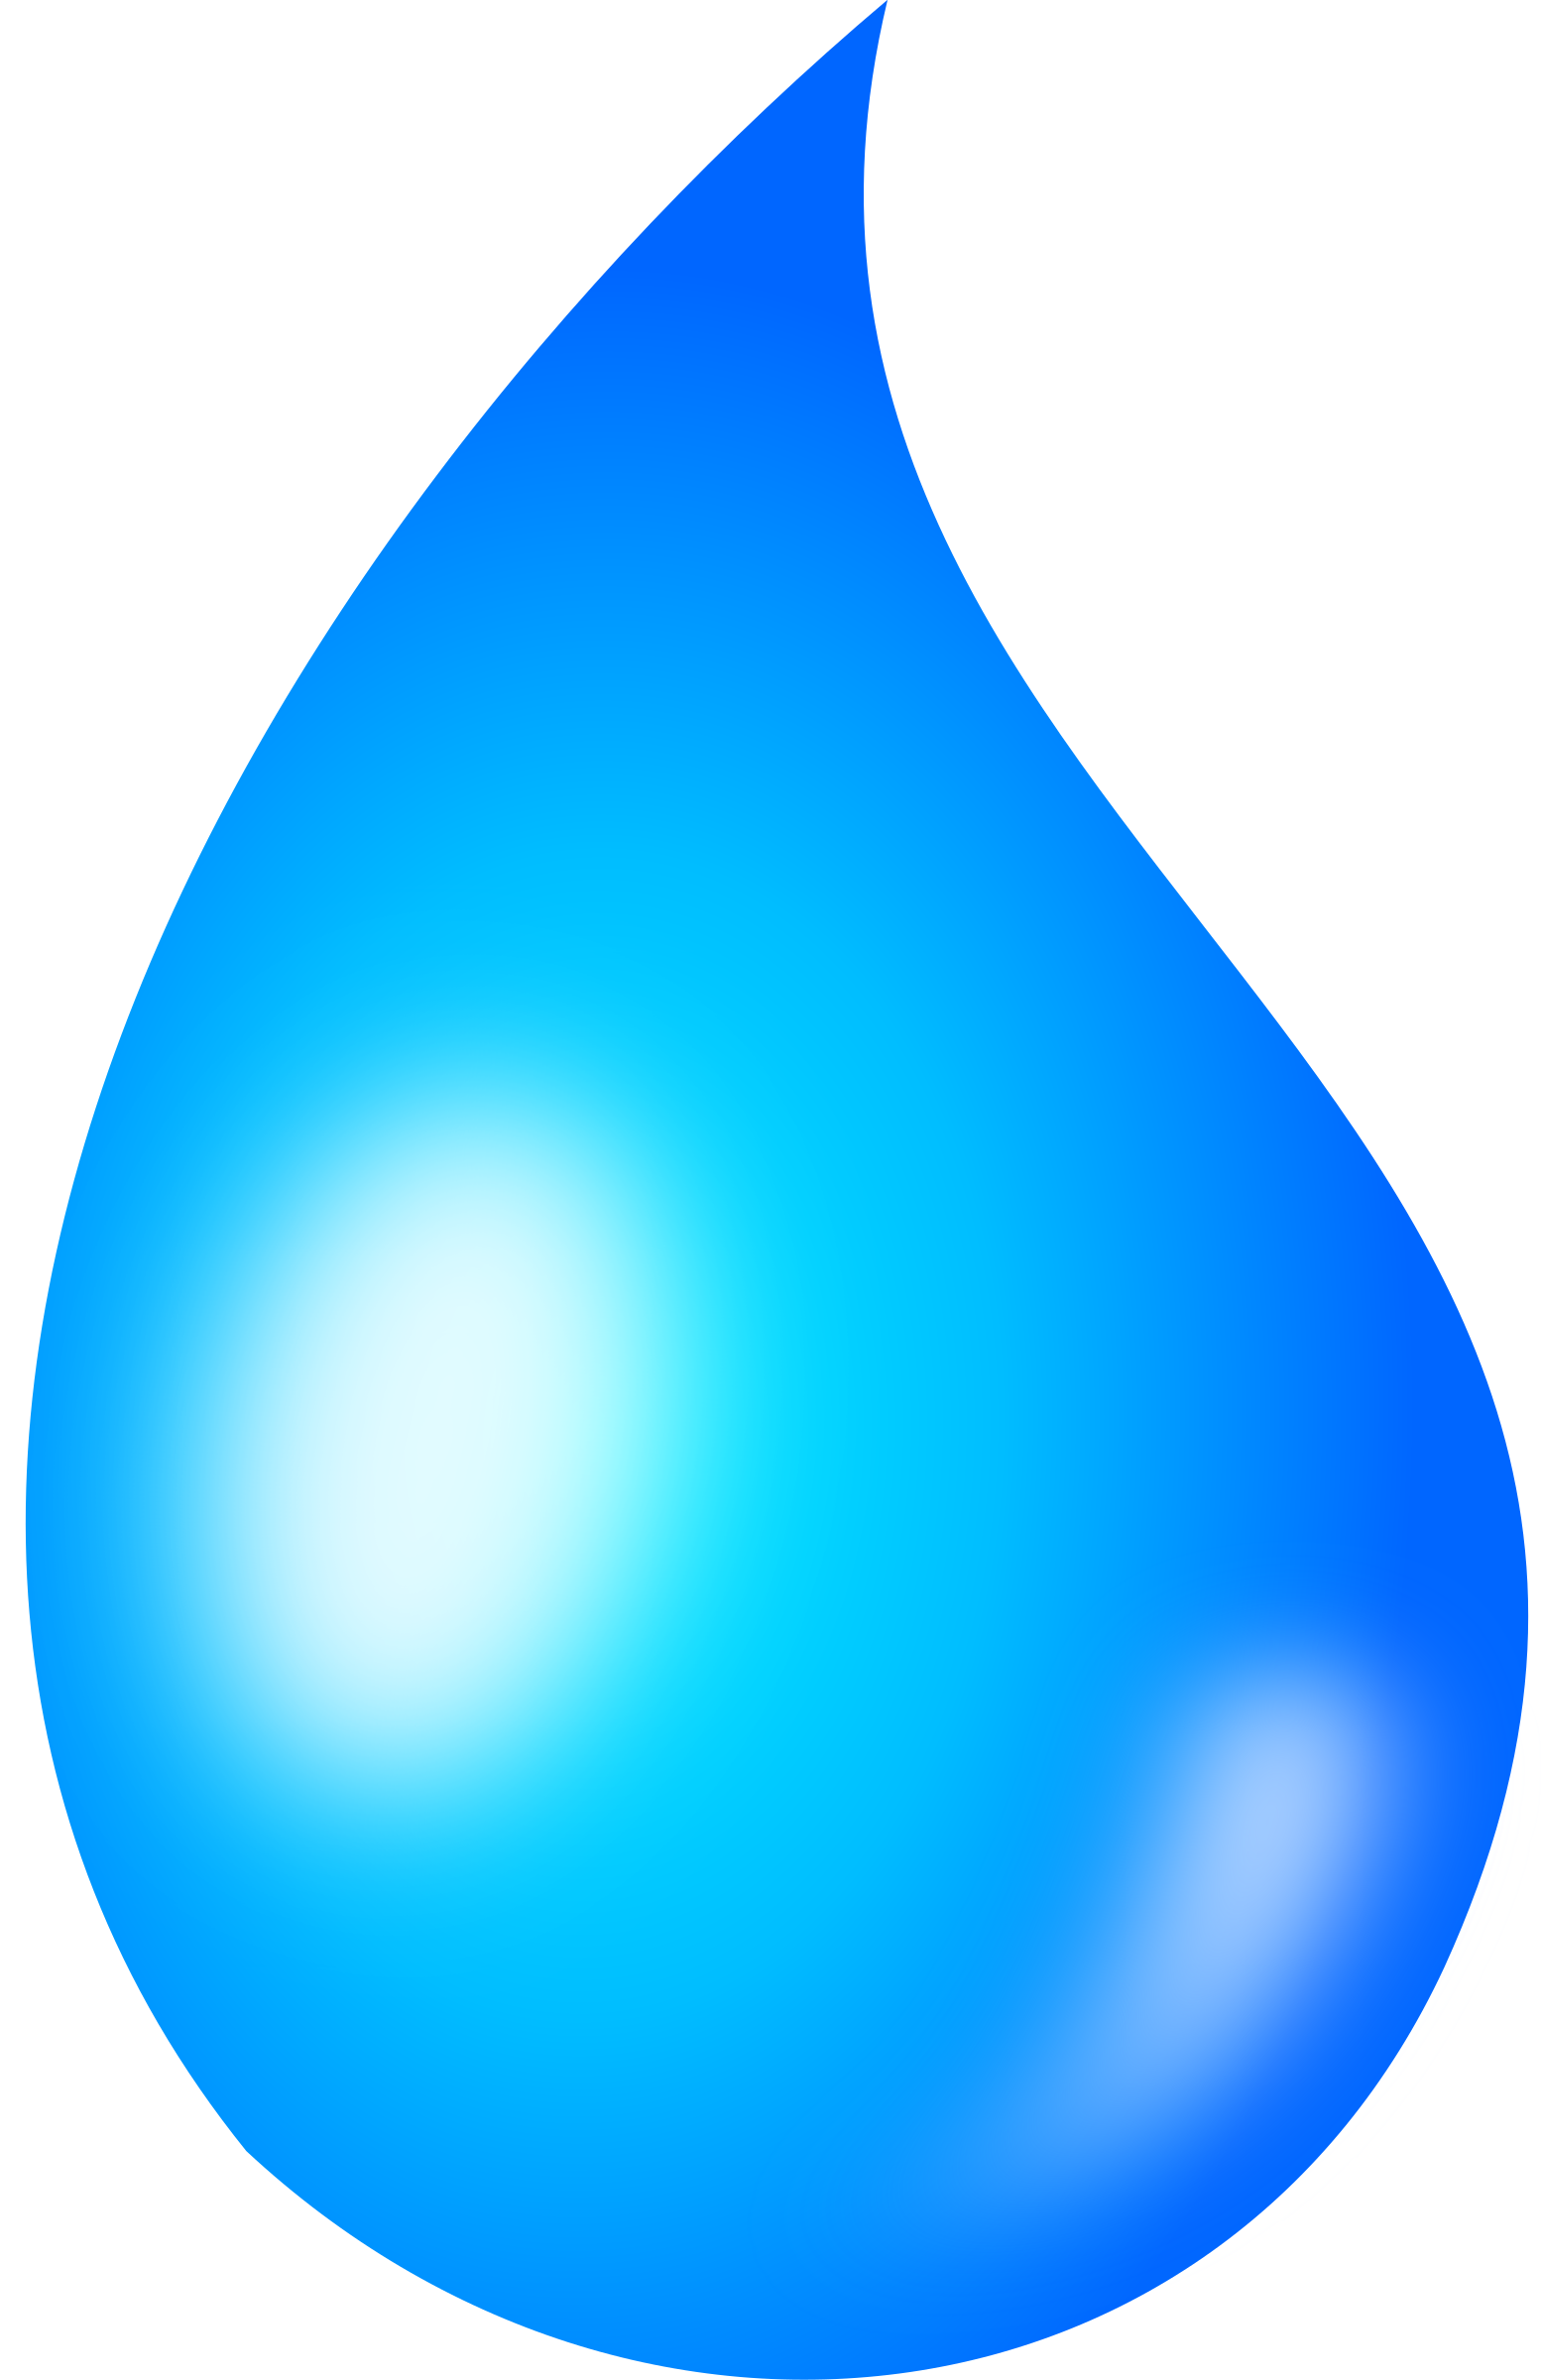 Water drop clipart images - .